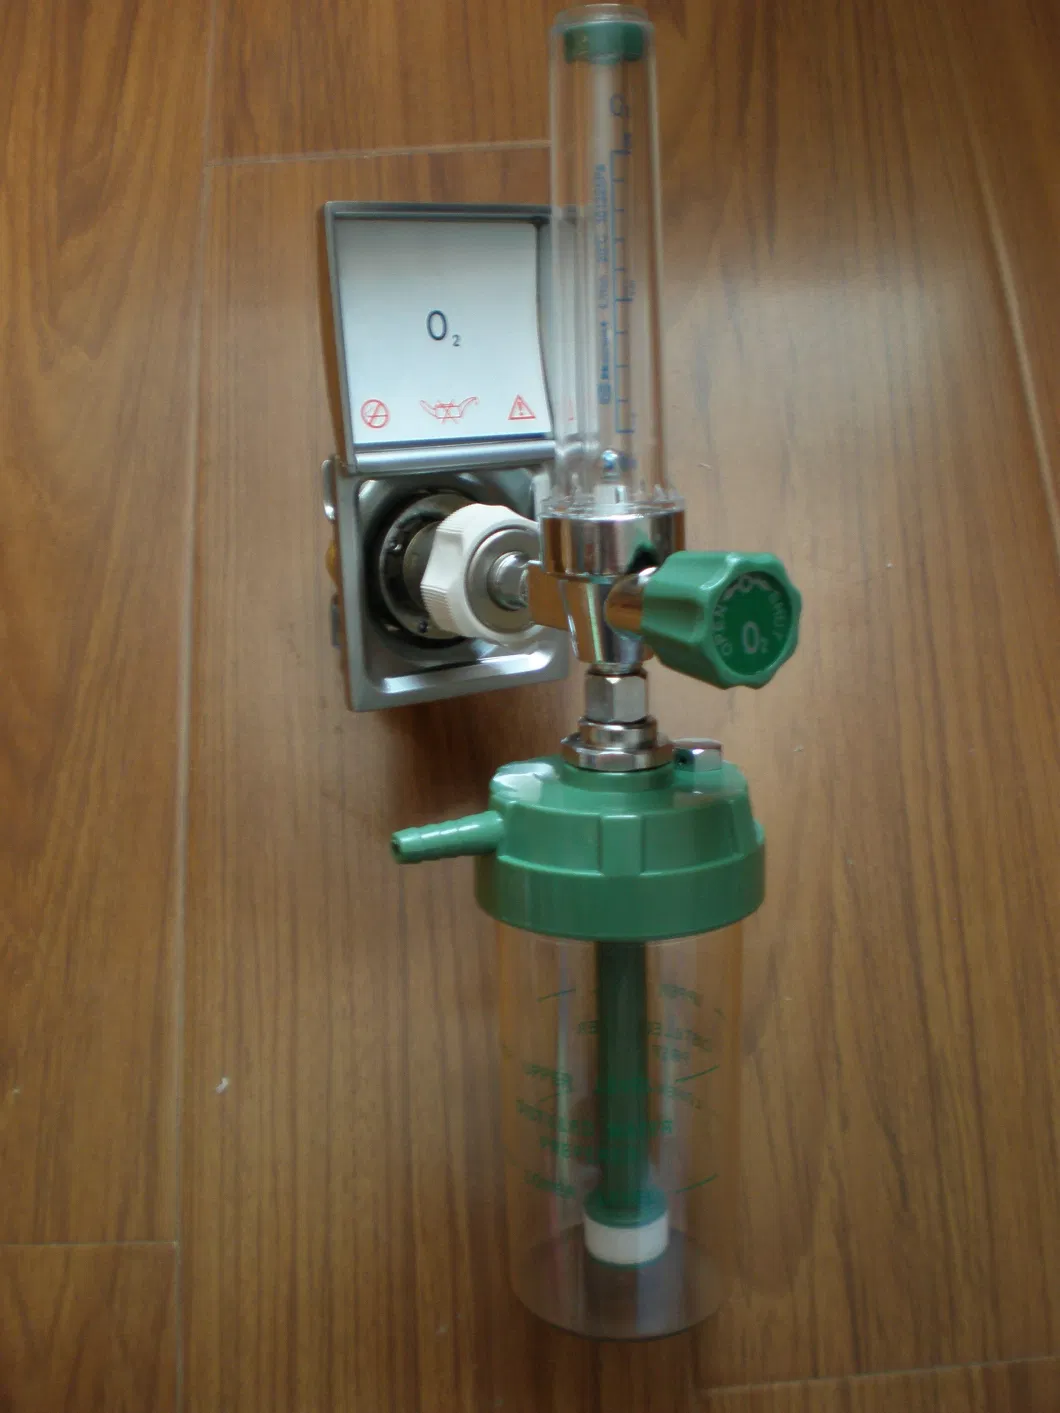 Lw-Flm-1 Oxygen Flowmeter with French Standard Afnor Probe and Humidifier Bottle